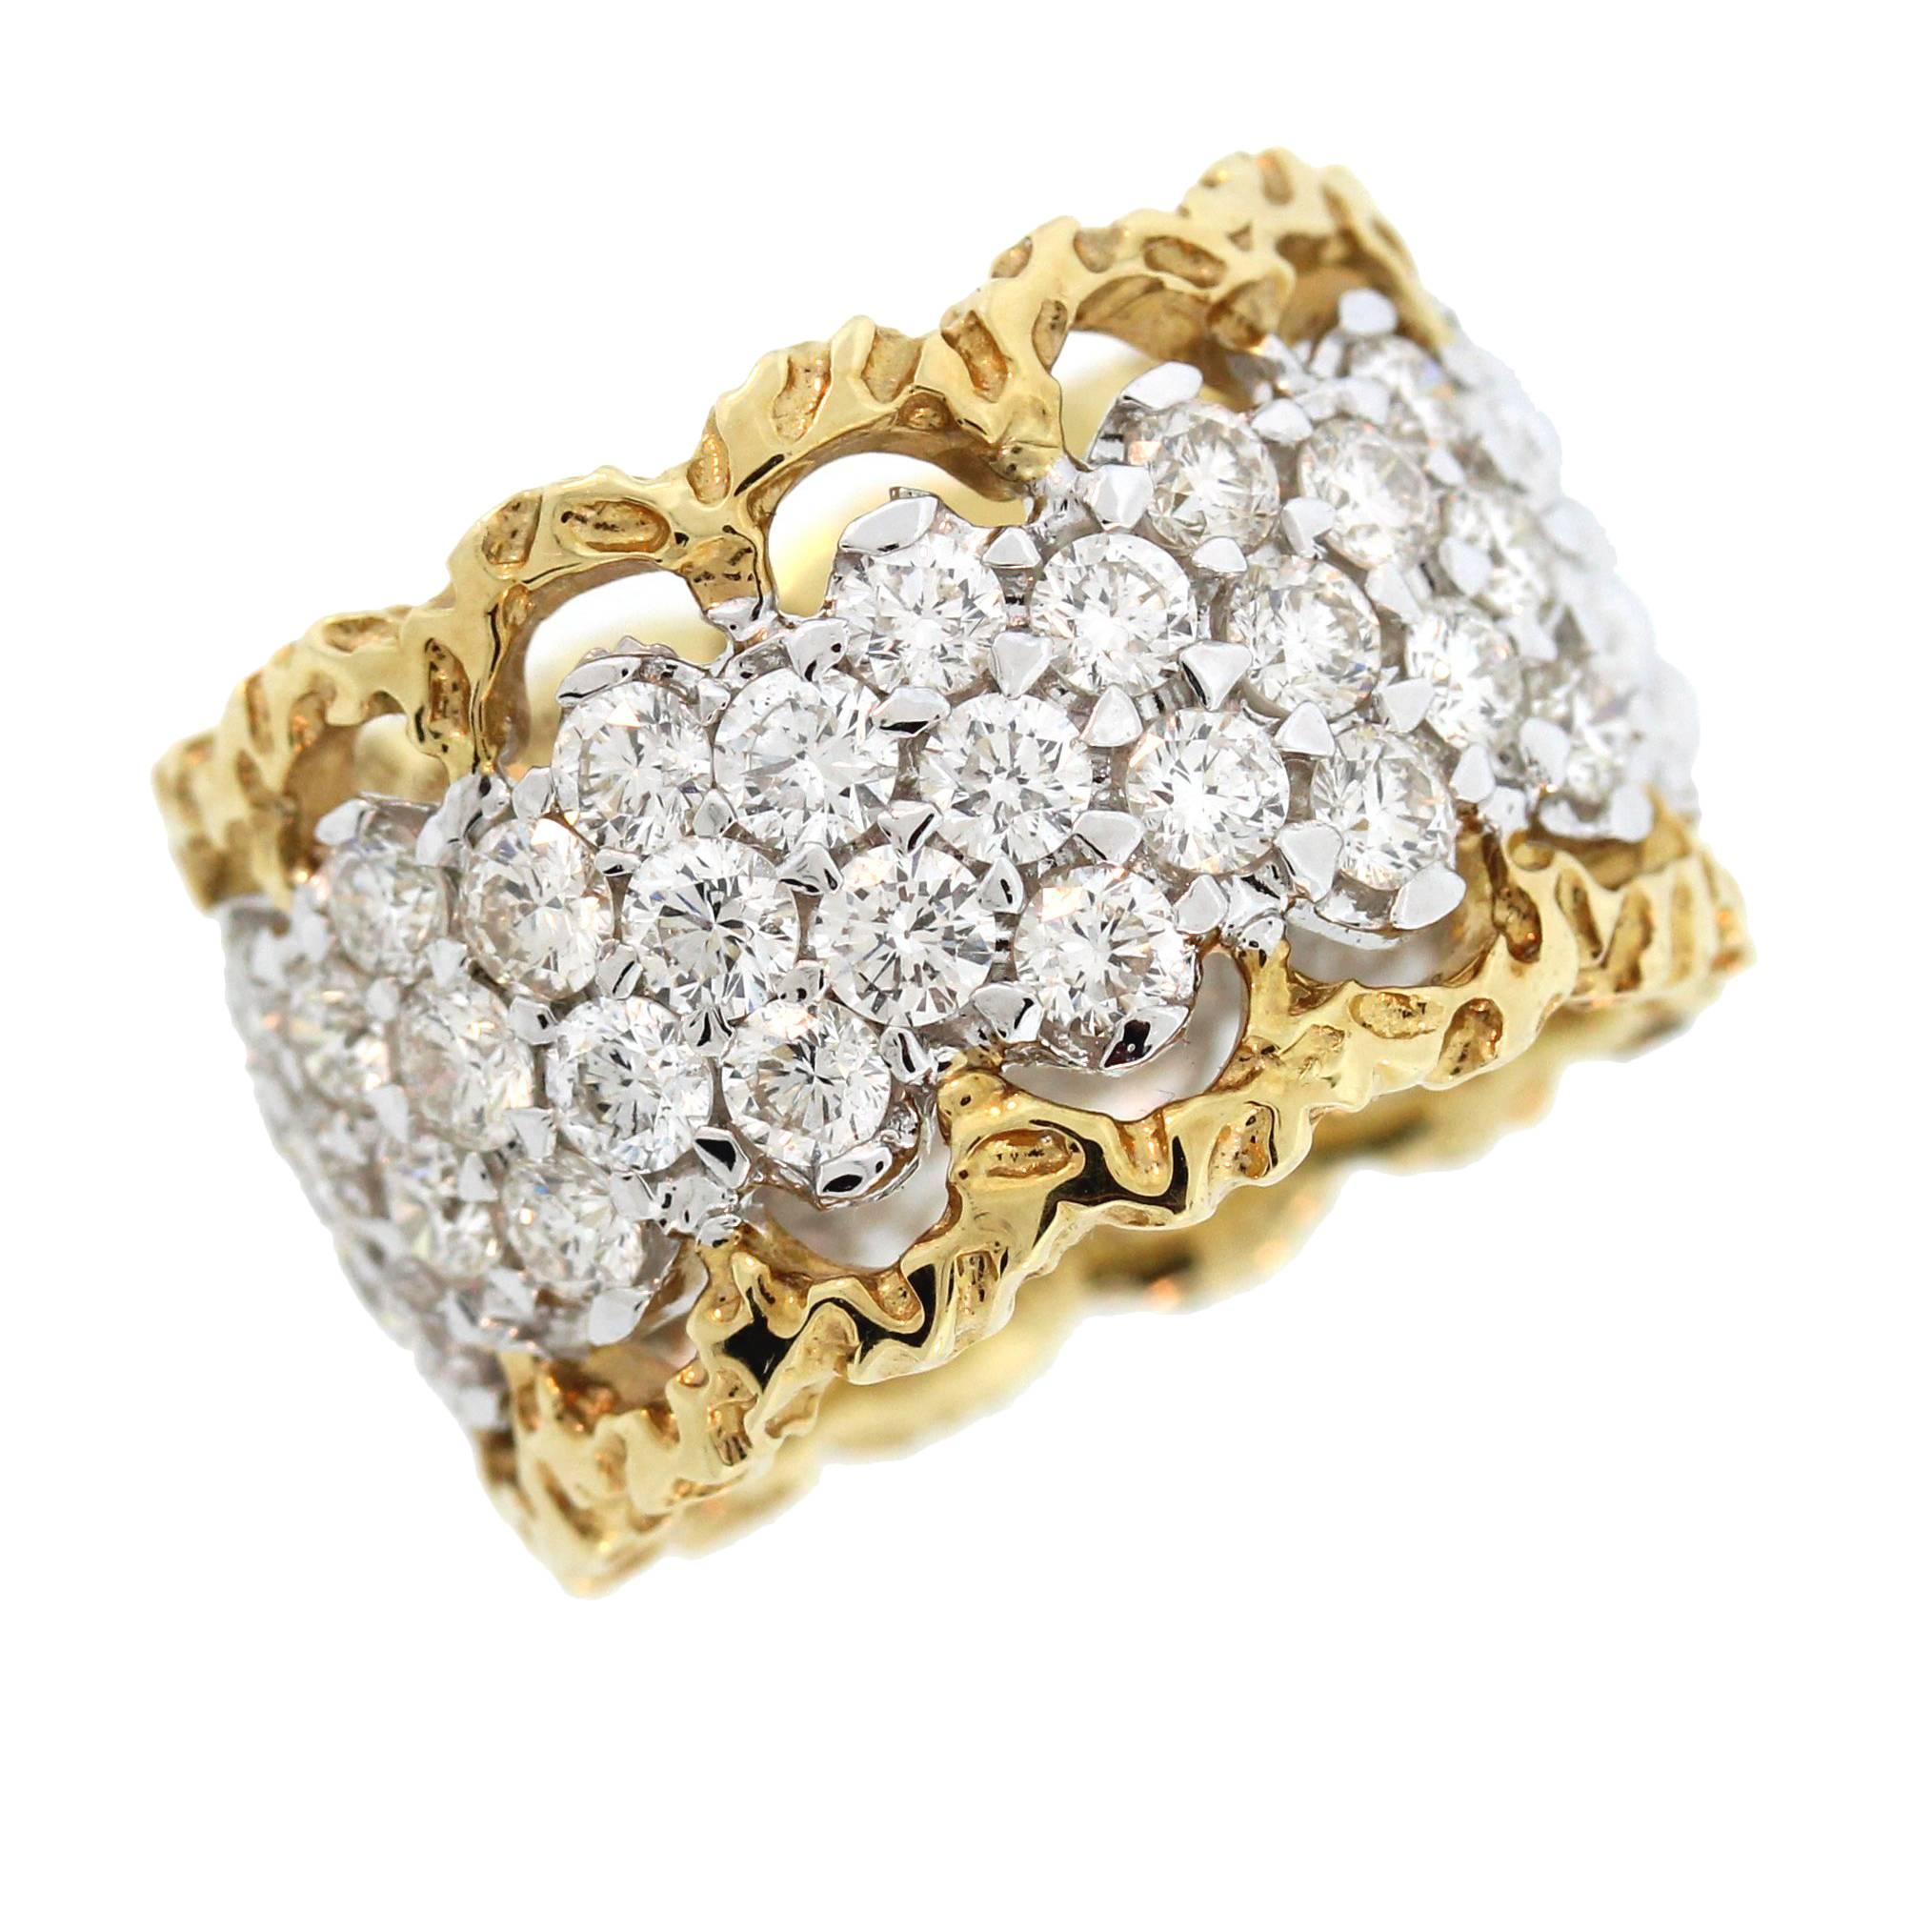 Beautiful Two-Tone Gold and Diamond Band Ring